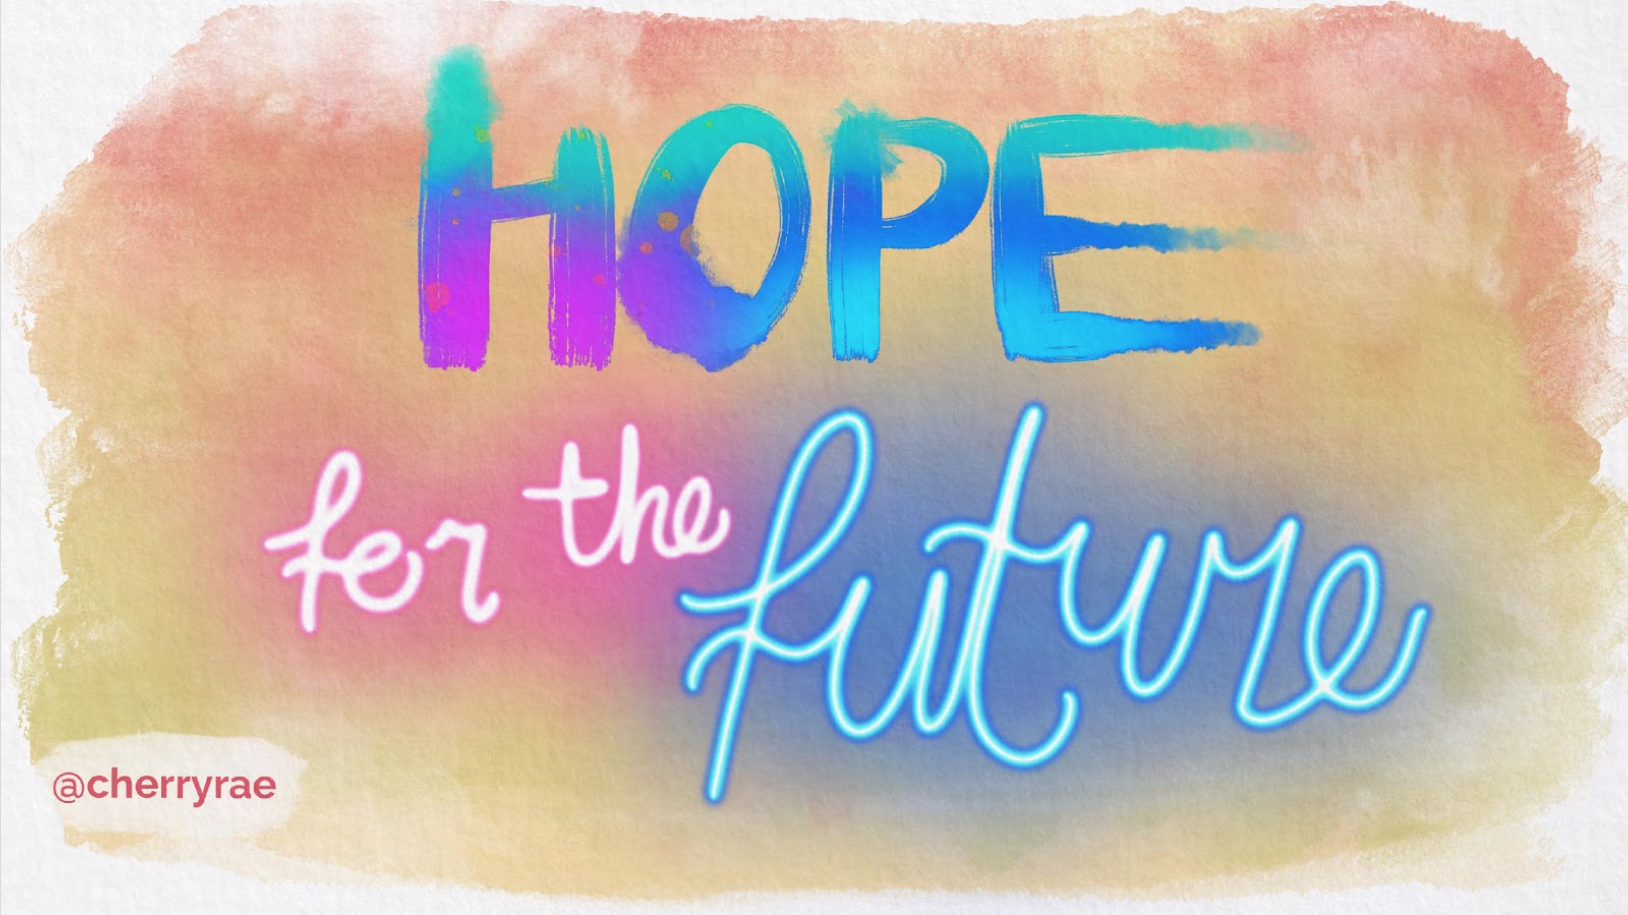 "Hope for the future" in a hand-illustrated watercolour and neon lights style.